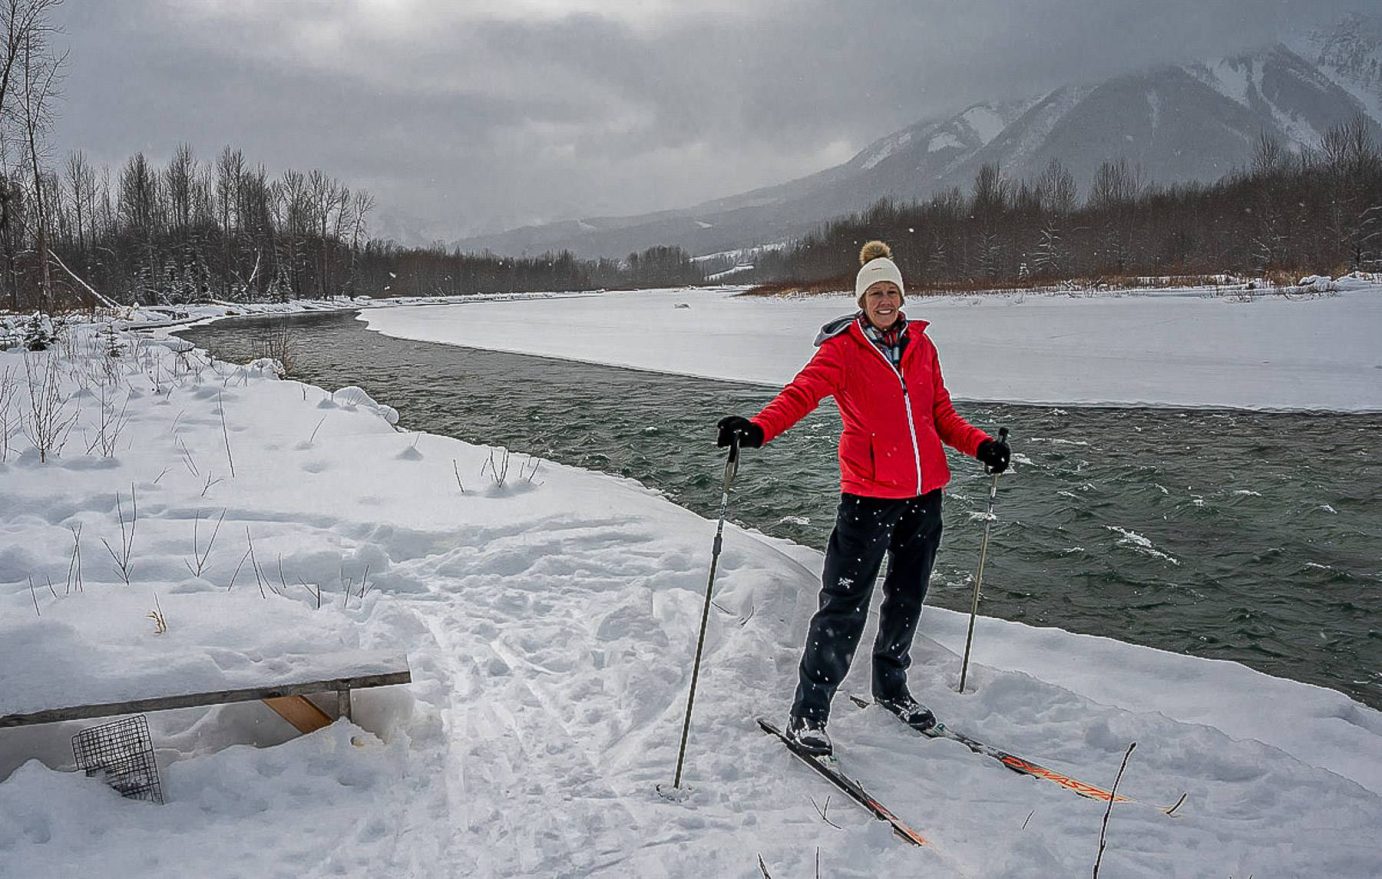 Cross-country skiing on the dog-friendly trail near the Fernie Golf Course